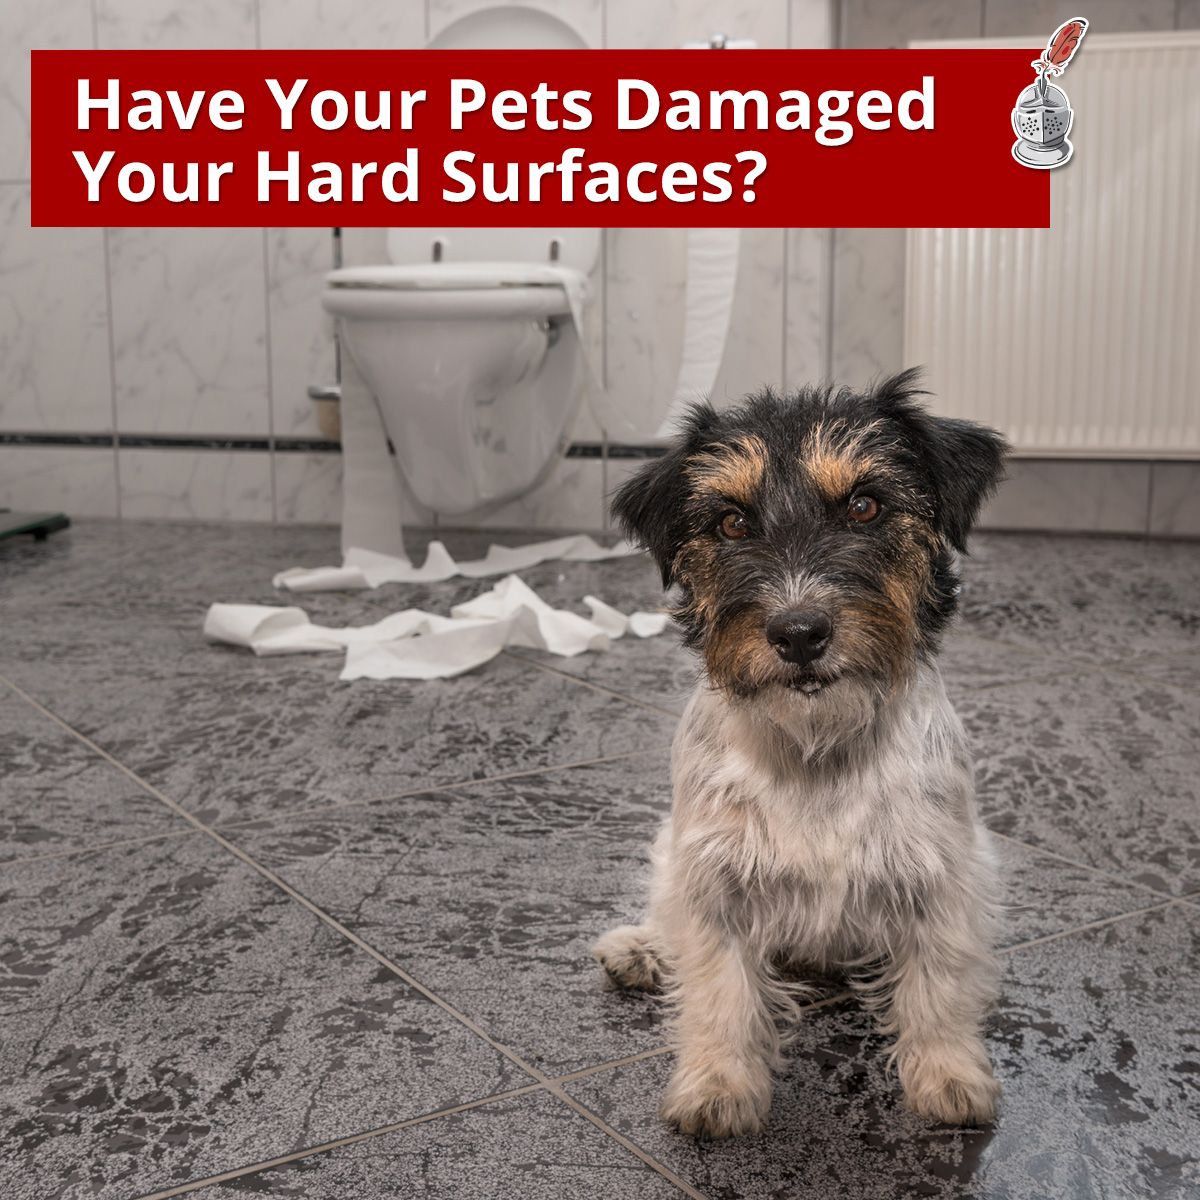 Have Your Pets Damaged Your Hard Surfaces?